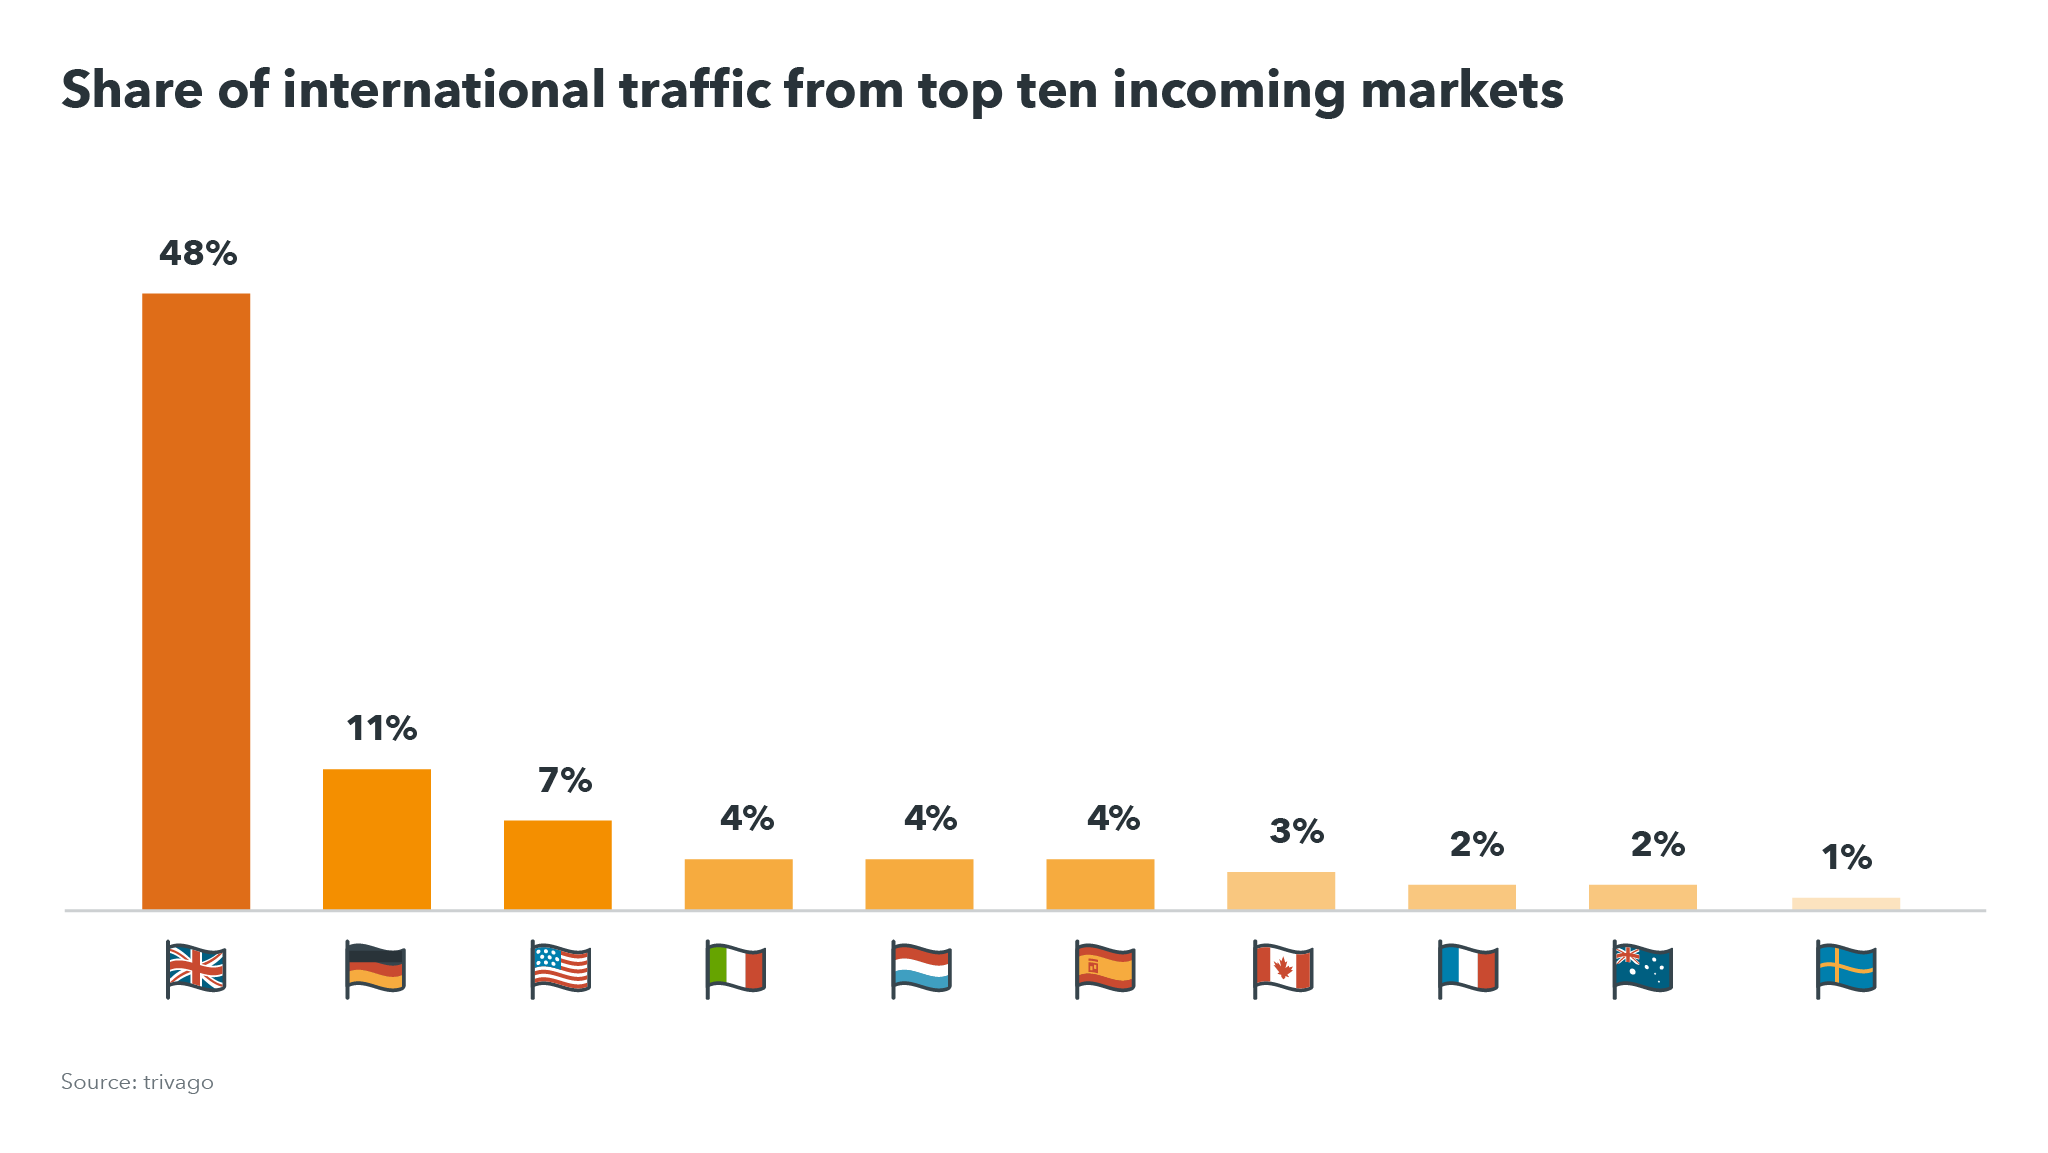 Share of international traffic from top ten incoming markets